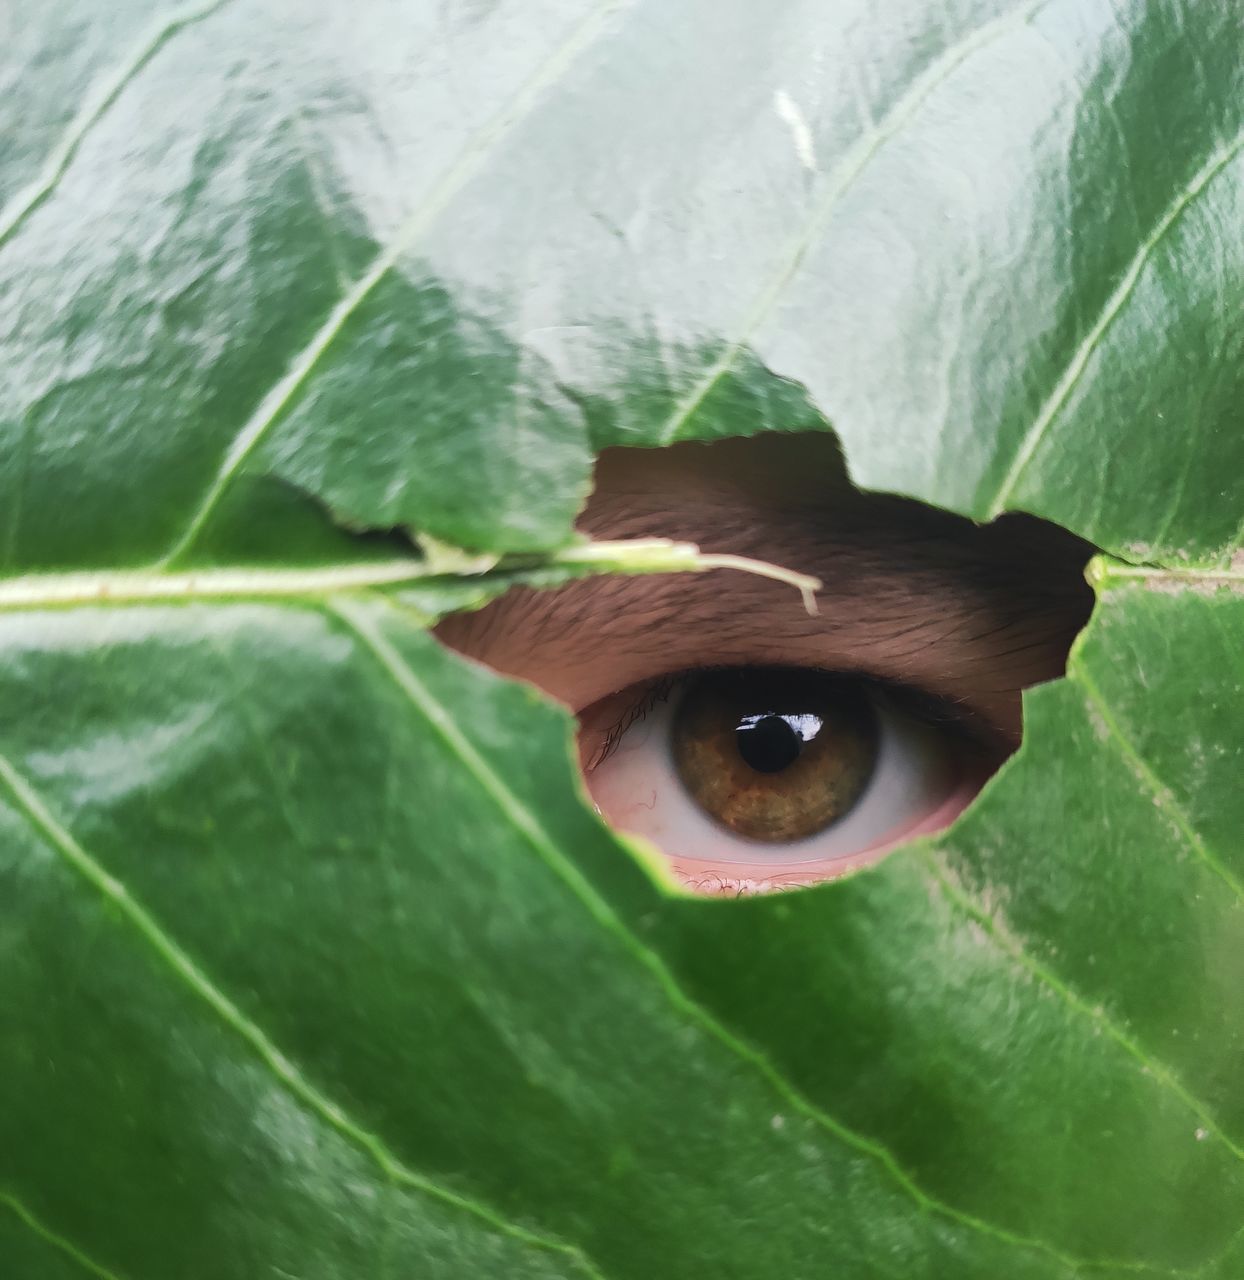 plant part, green color, leaf, close-up, human eye, eye, plant, nature, looking at camera, sensory perception, human body part, hole, growth, one person, leaf vein, body part, portrait, day, eyeball, outdoors, leaves, human face, eyelid